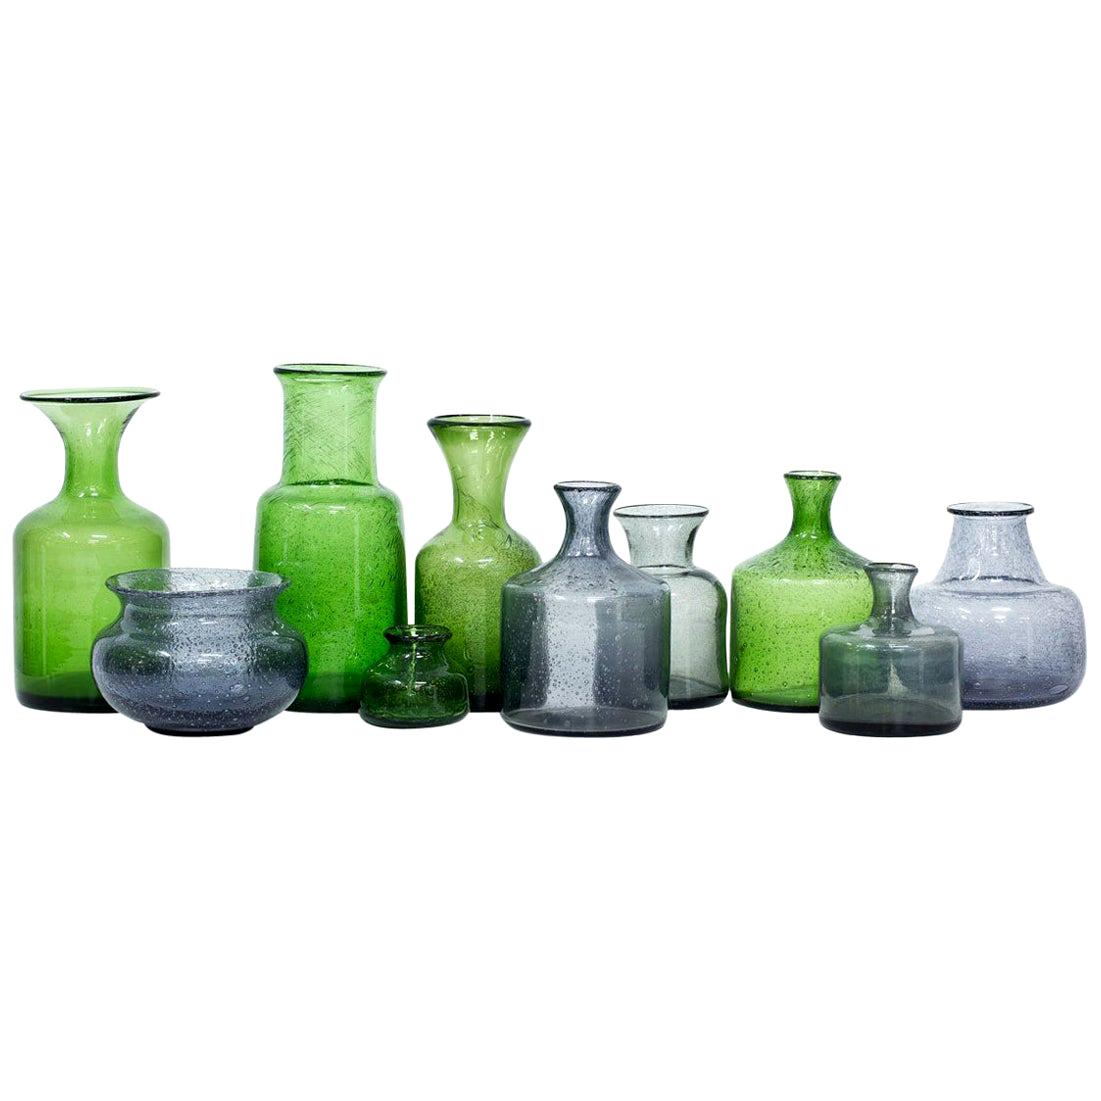 Collection of ten glass vases designed by Erik Höglund.
Mouth blown at Boda glass factory in Sweden during the 1950s.
Group of grey and green vases of various sizes and shapes, all with air bubbles in the glass.
All vases are engraved underneath.